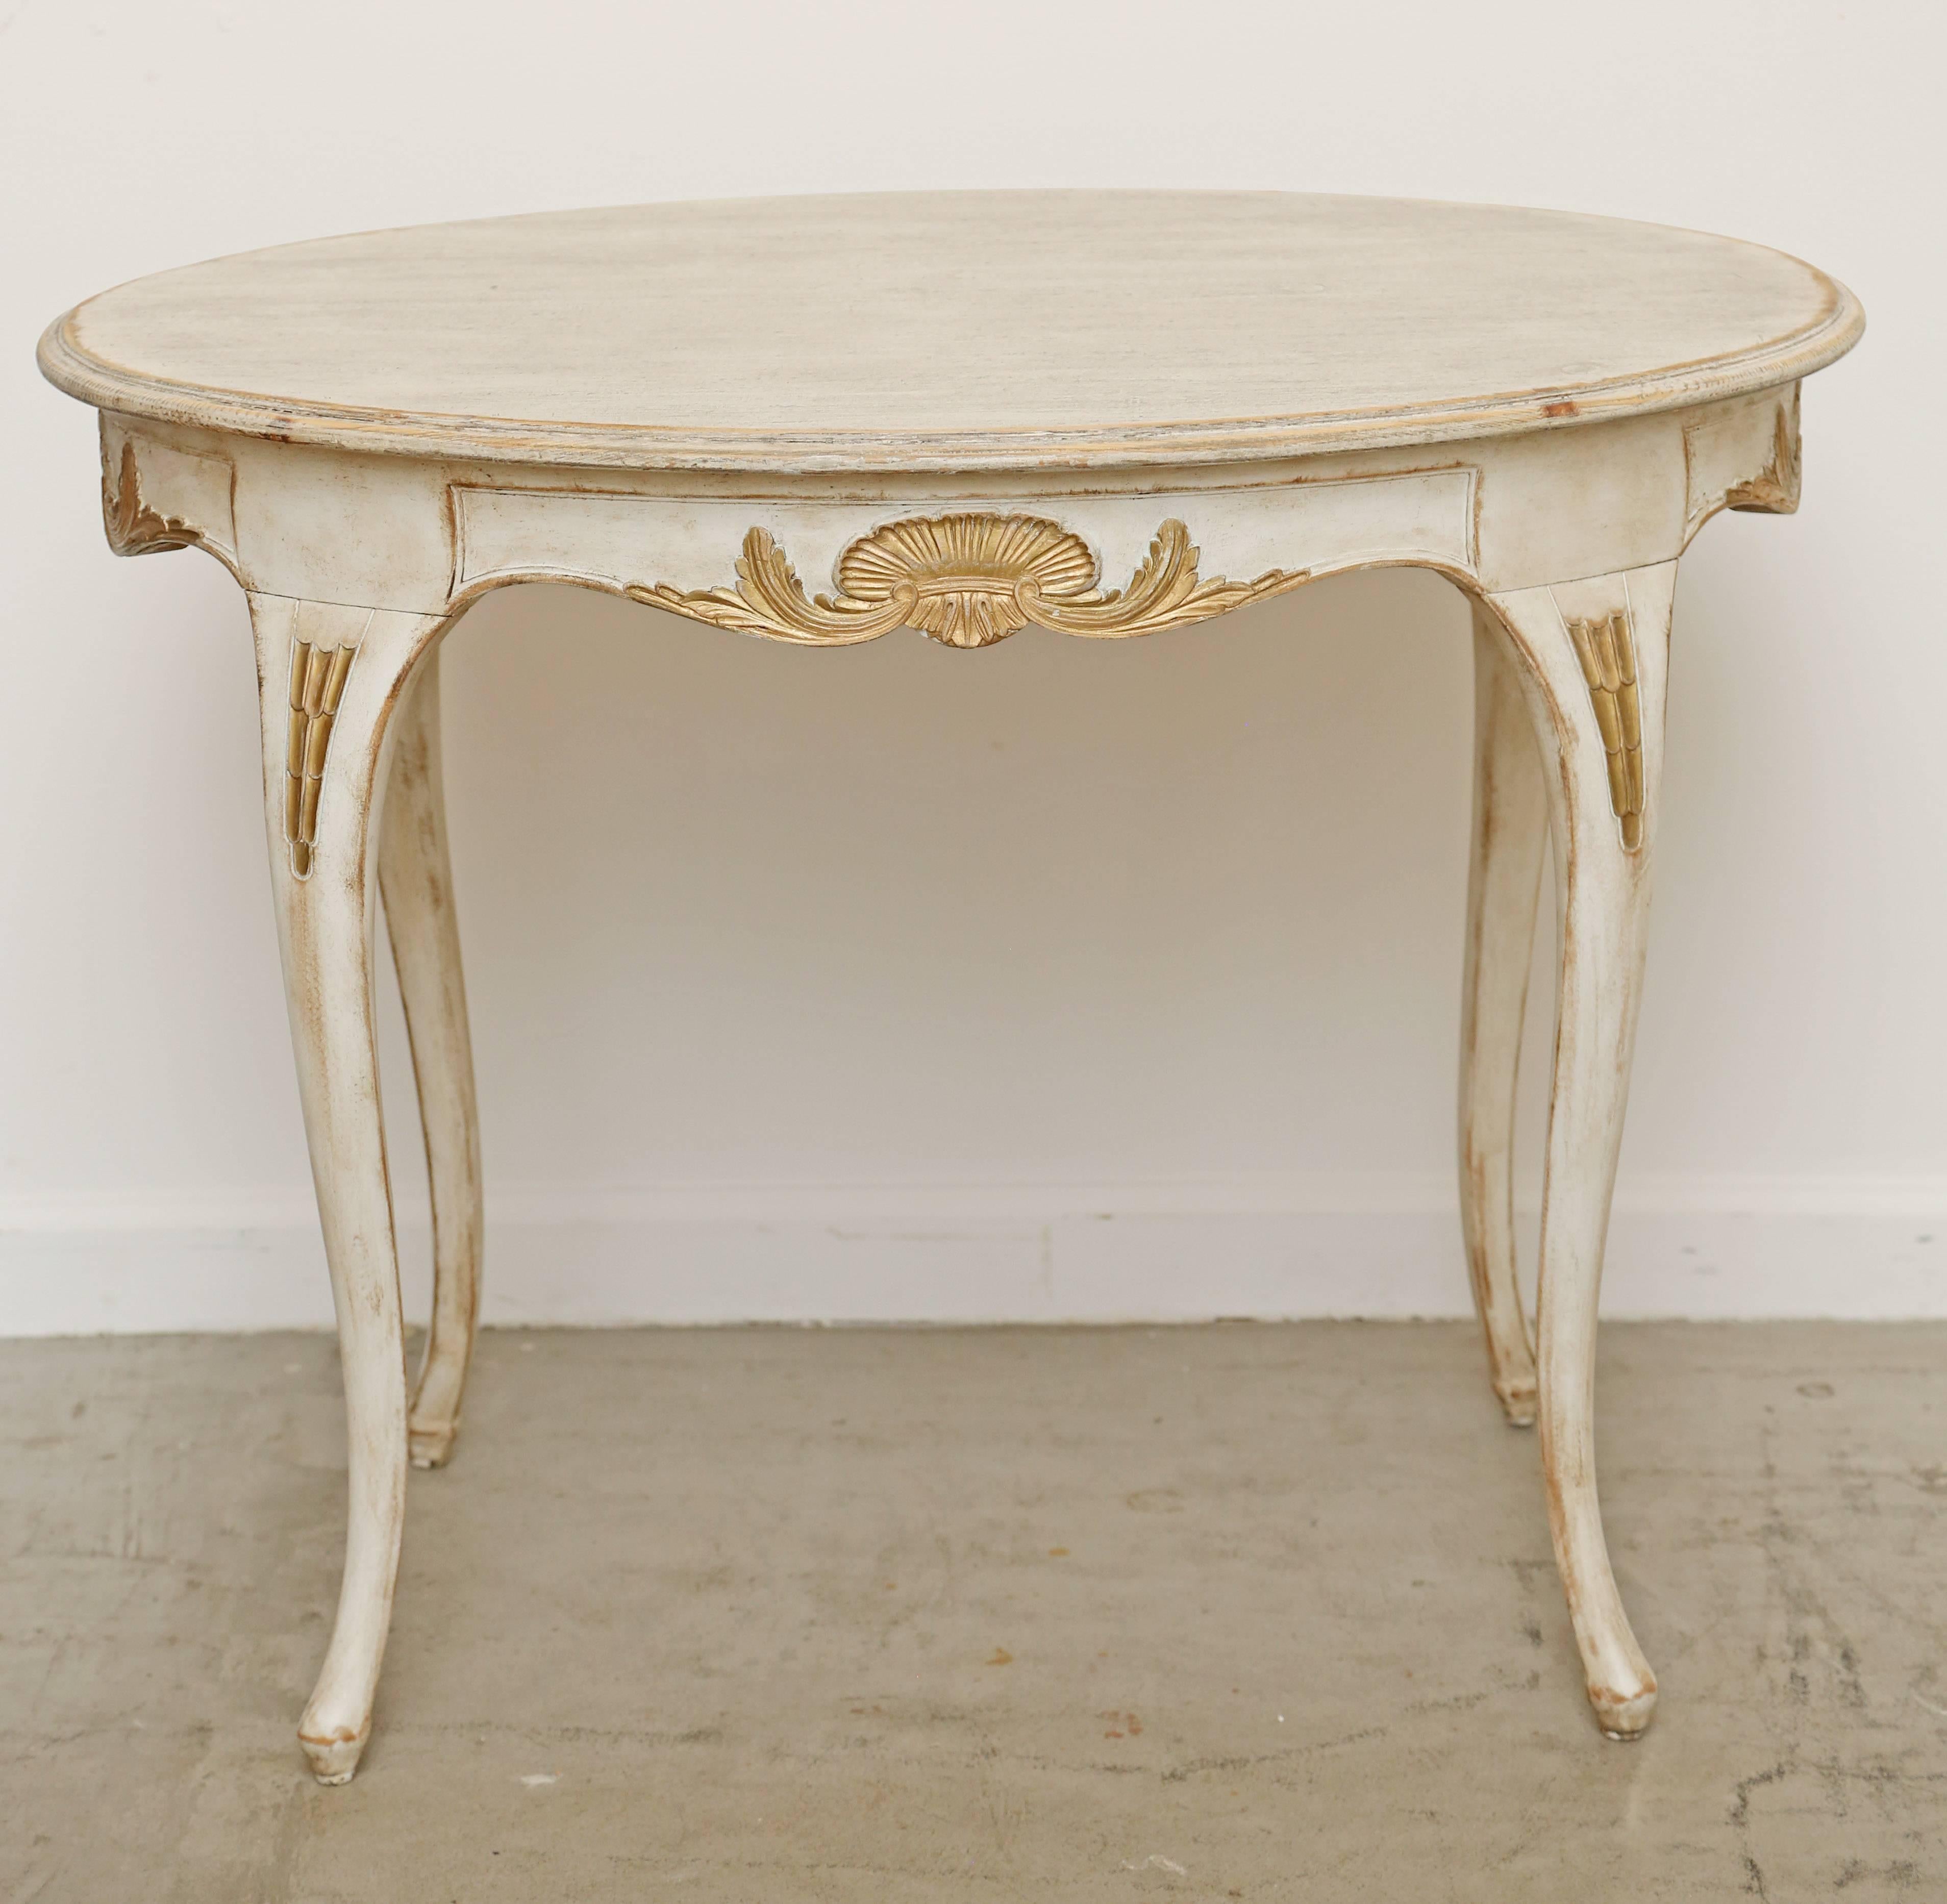 Antique Swedish Rococo carved oval table with elegant carved and gold leaf
 cartouches and details top of each cabriolet legs. The table is a very nice size
oval shape with graceful curved legs and small foot. Could be for a lamp-end
table or a